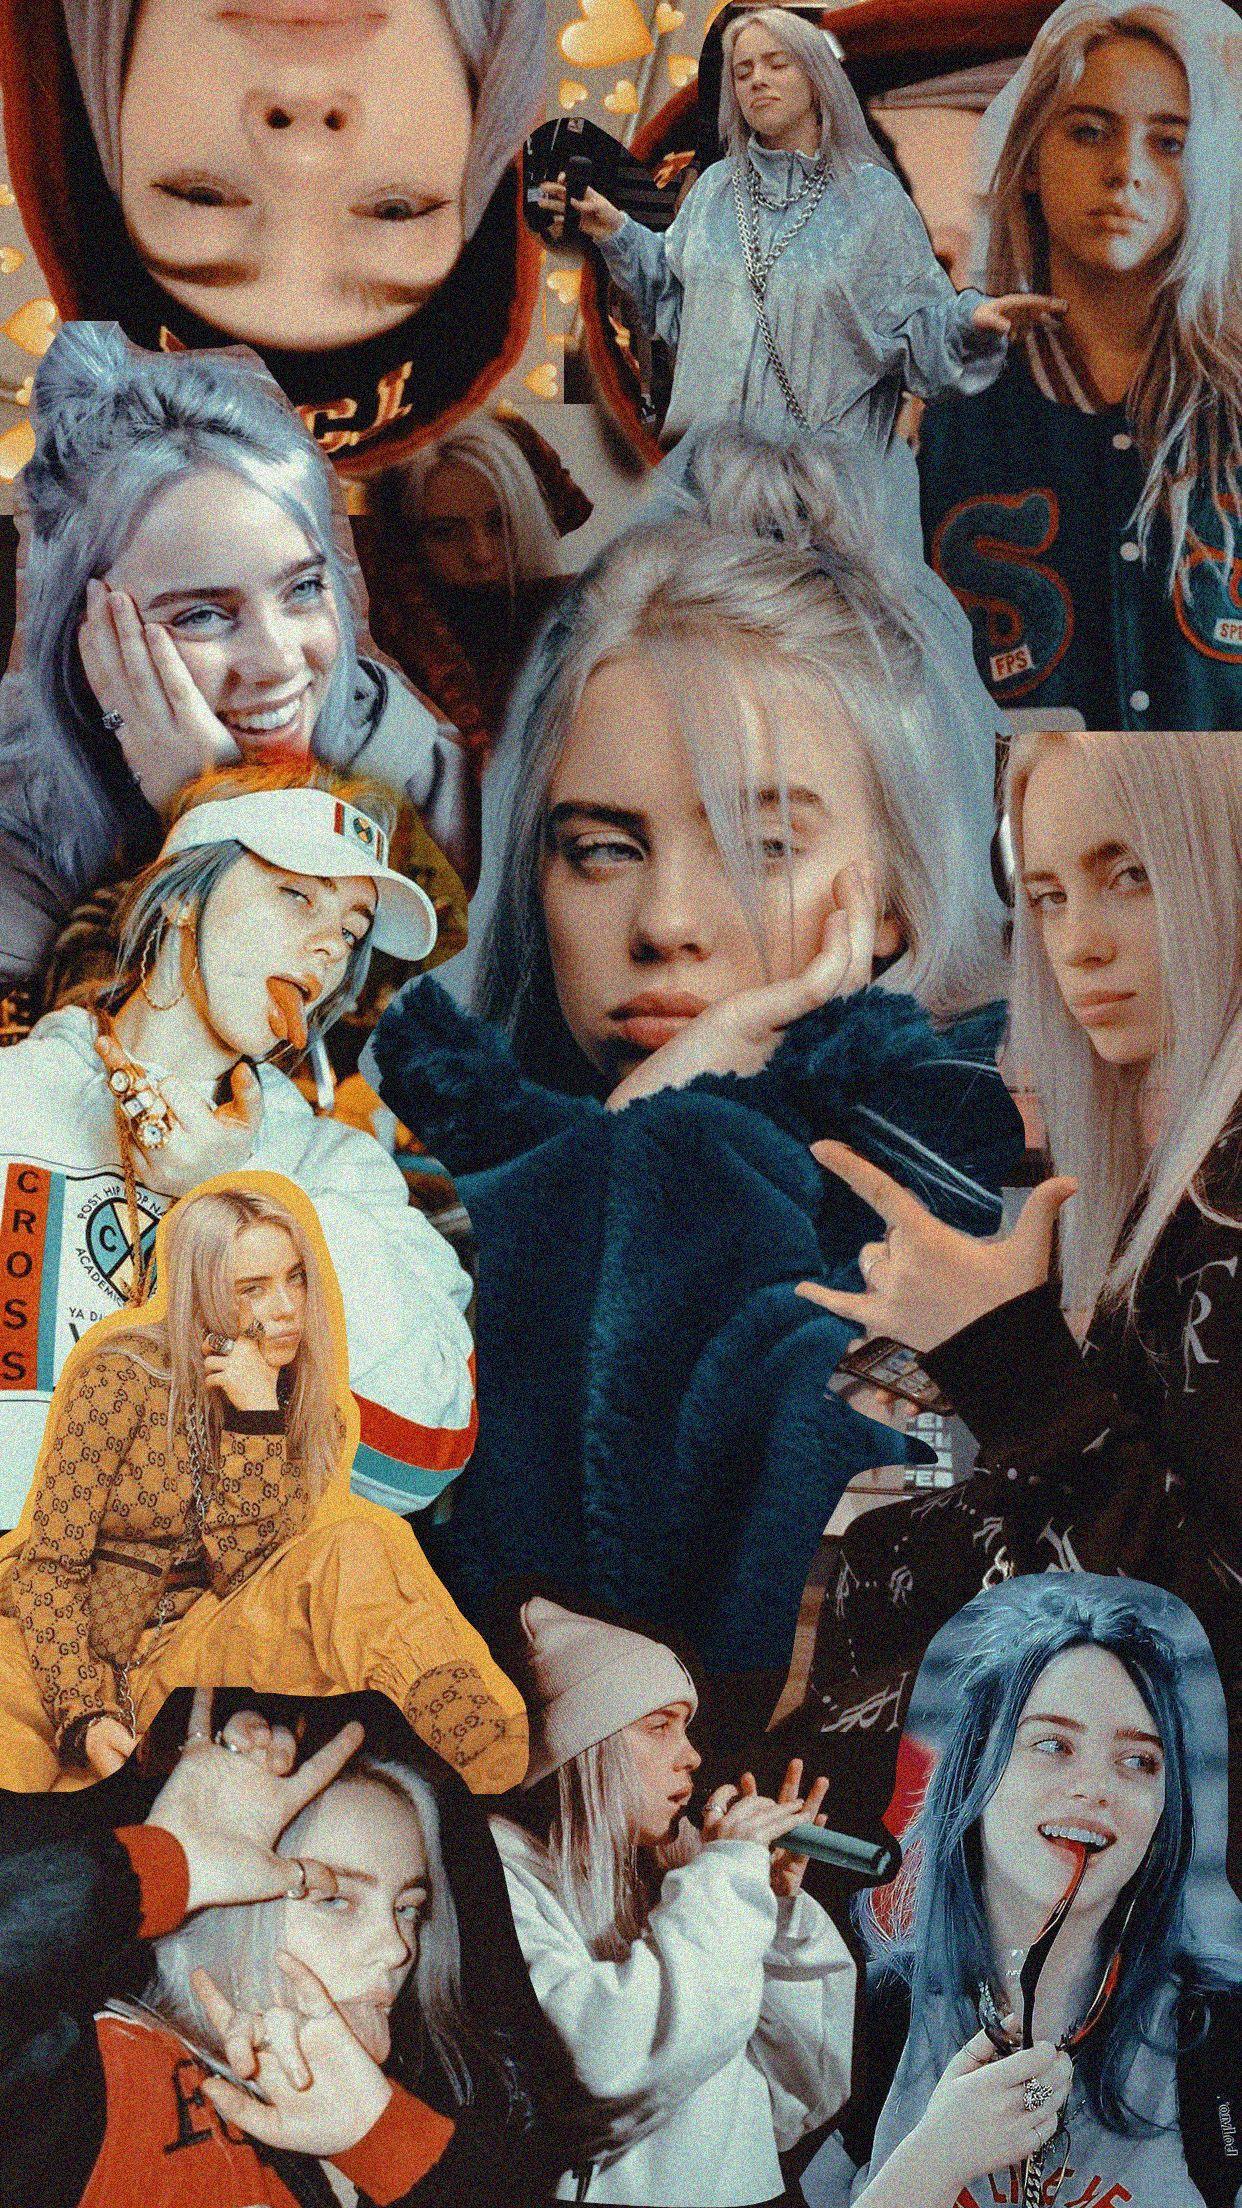 500 Aesthetic Billie Eilish Phone Wallpapers  Background Beautiful Best  Available For Download Aesthetic Billie Eilish Phone Images Free On  Zicxacomphotos  Zicxa Photos